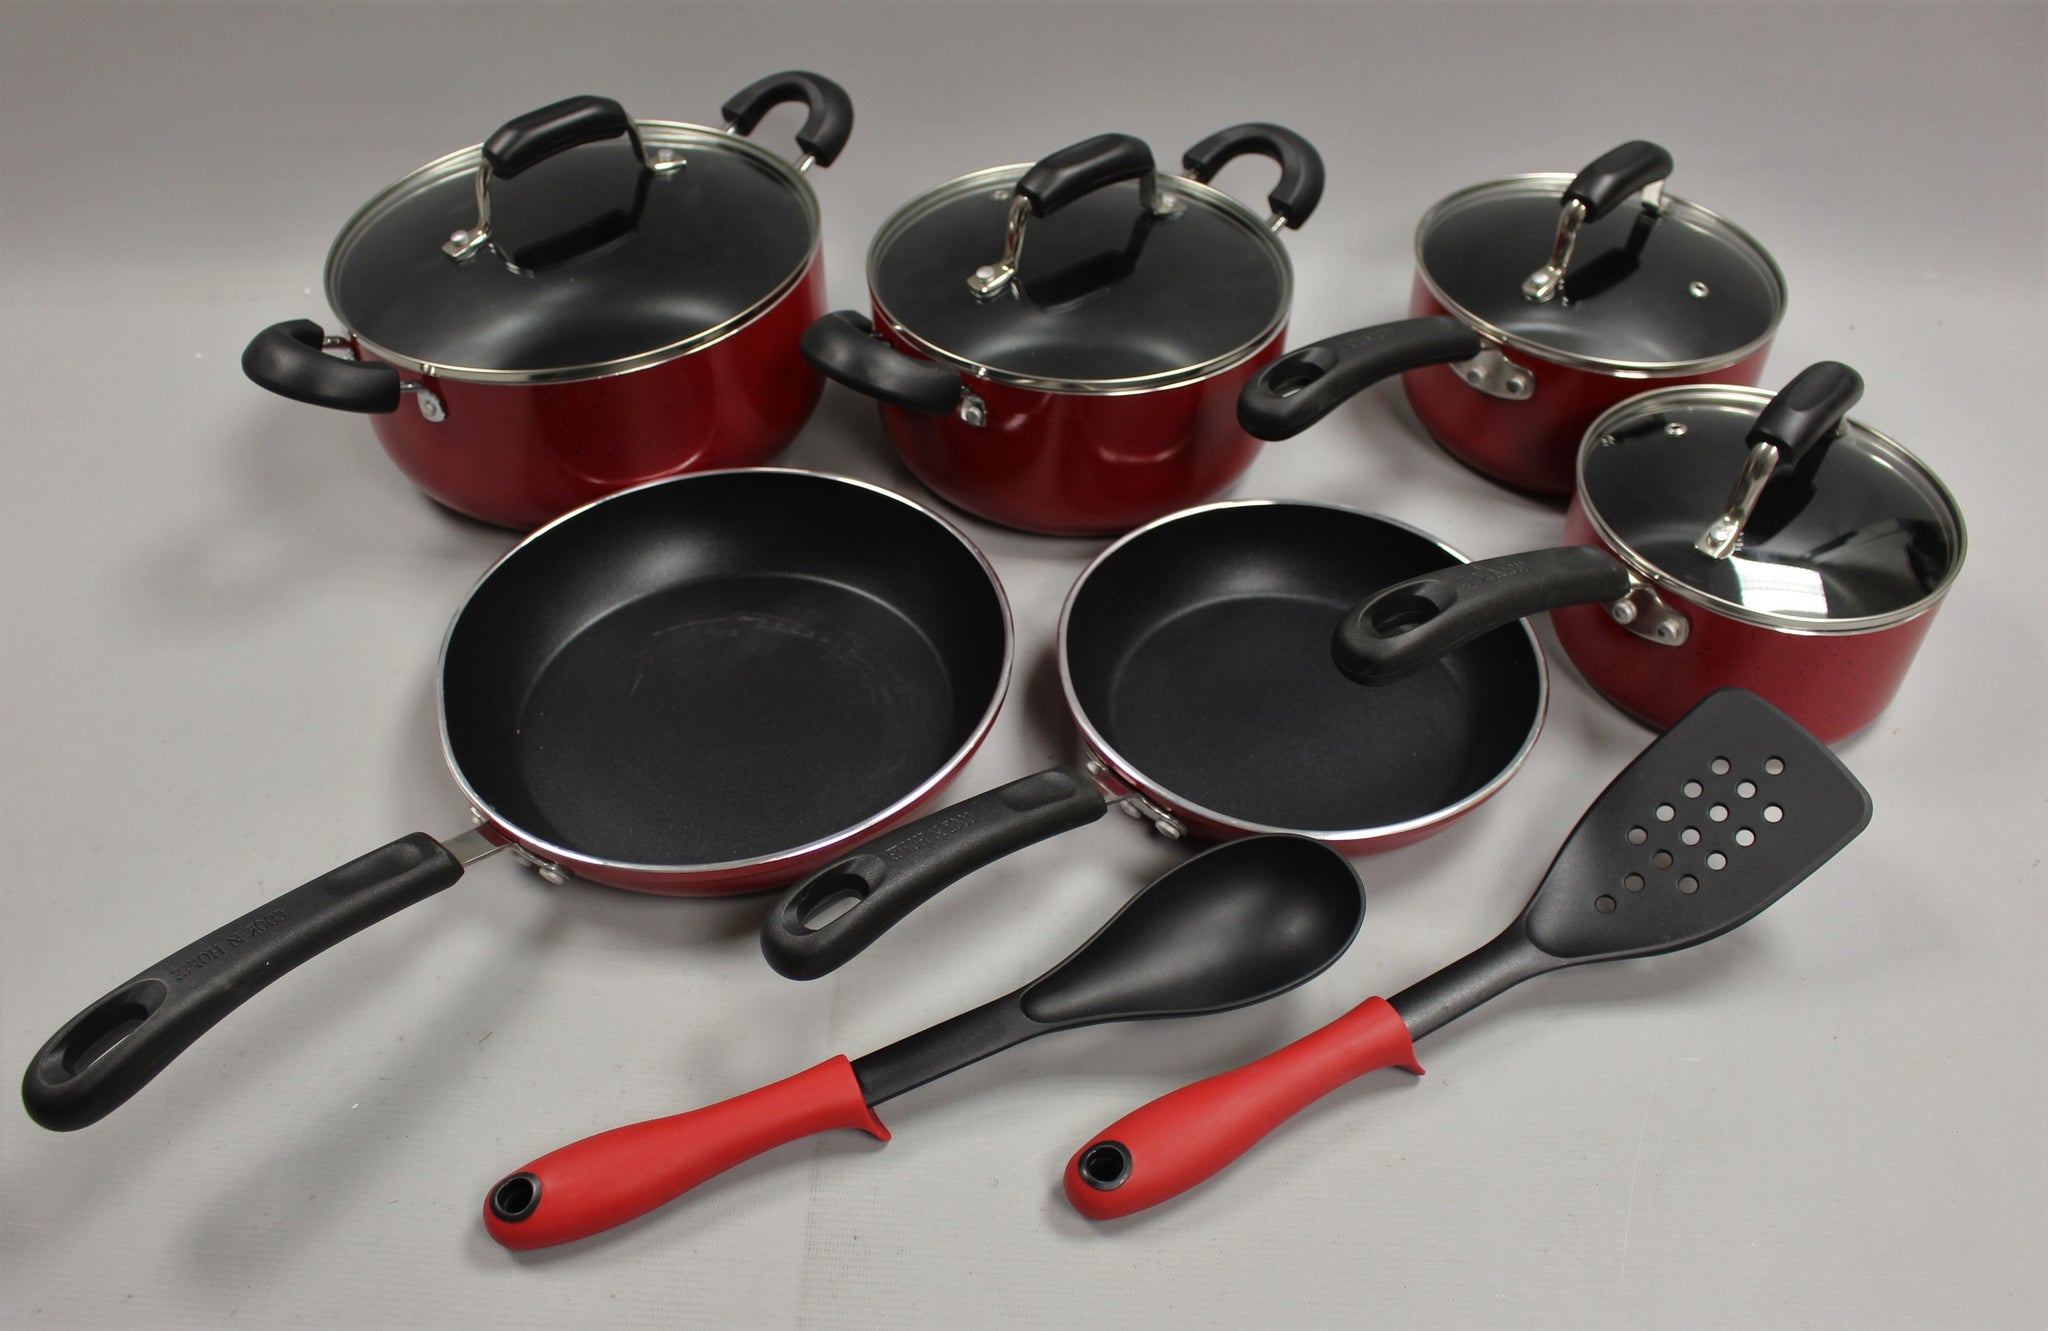 Cook N Home 12-Piece Nonstick Stay Cool Handle Cookware Set, Marble Pattern - Red